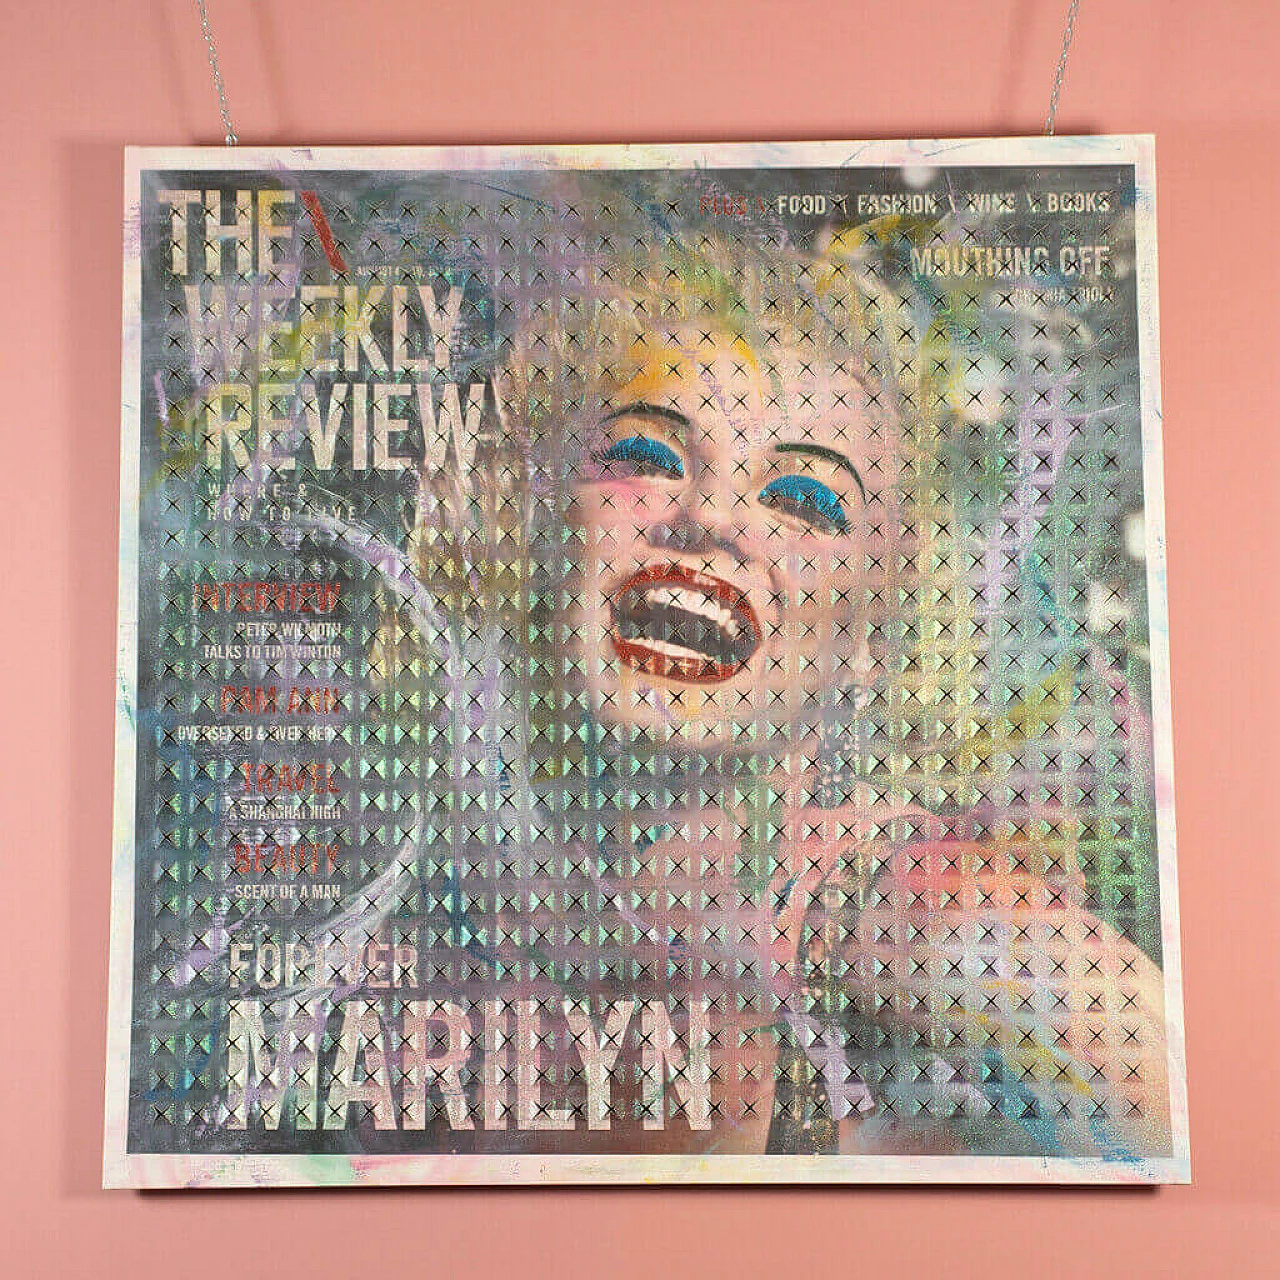 Painting The weekly review depicting Marilyn Monroe, 90s 1184890